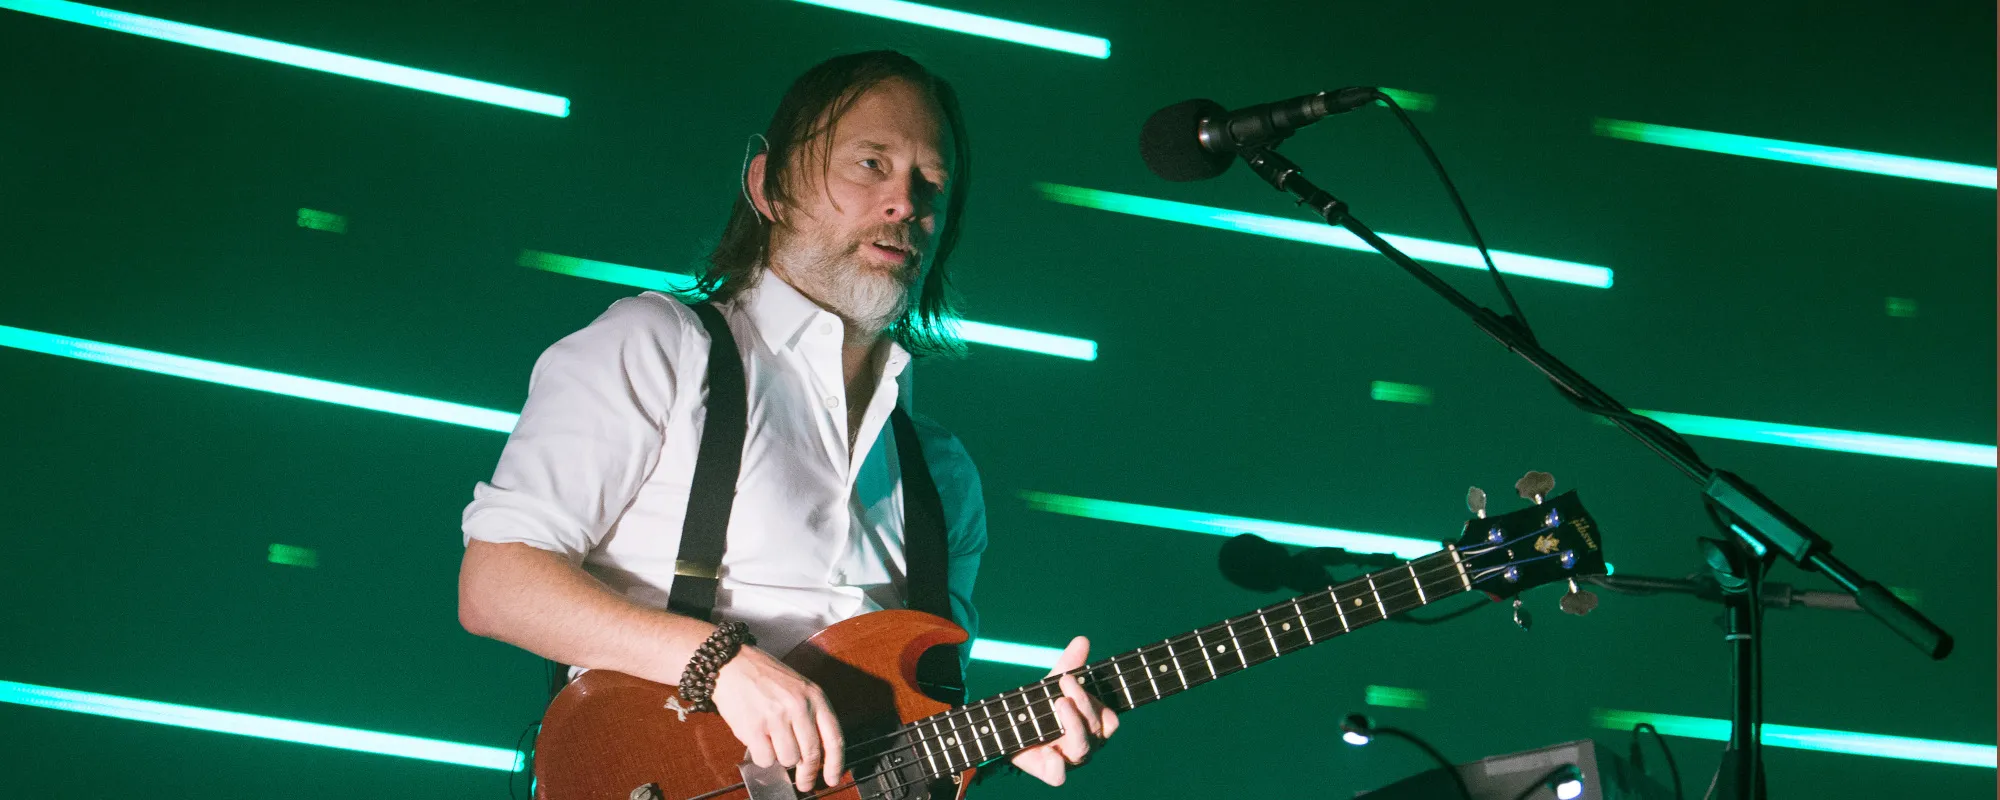 Top 10 Thom Yorke Songs—from Solo Hits to Radiohead to The Smile